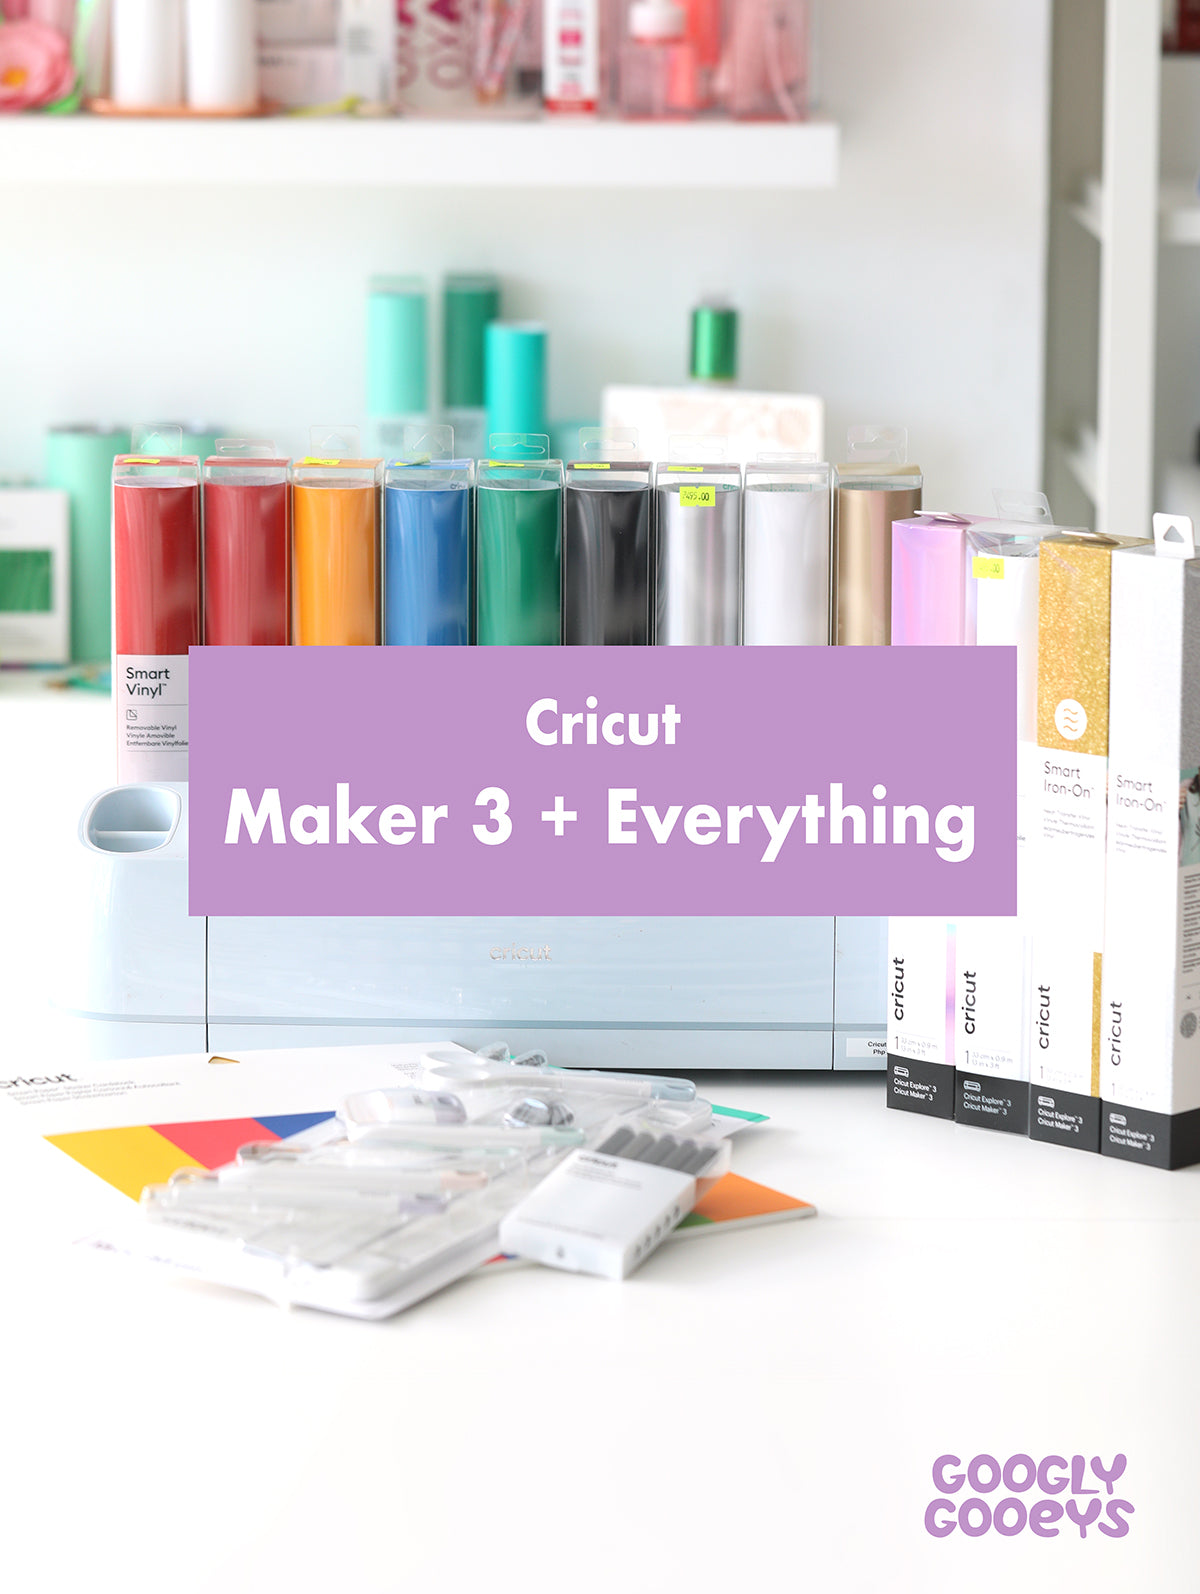 Cricut Maker 3 + Everything Bundle with Smart Vinyls and Accessories